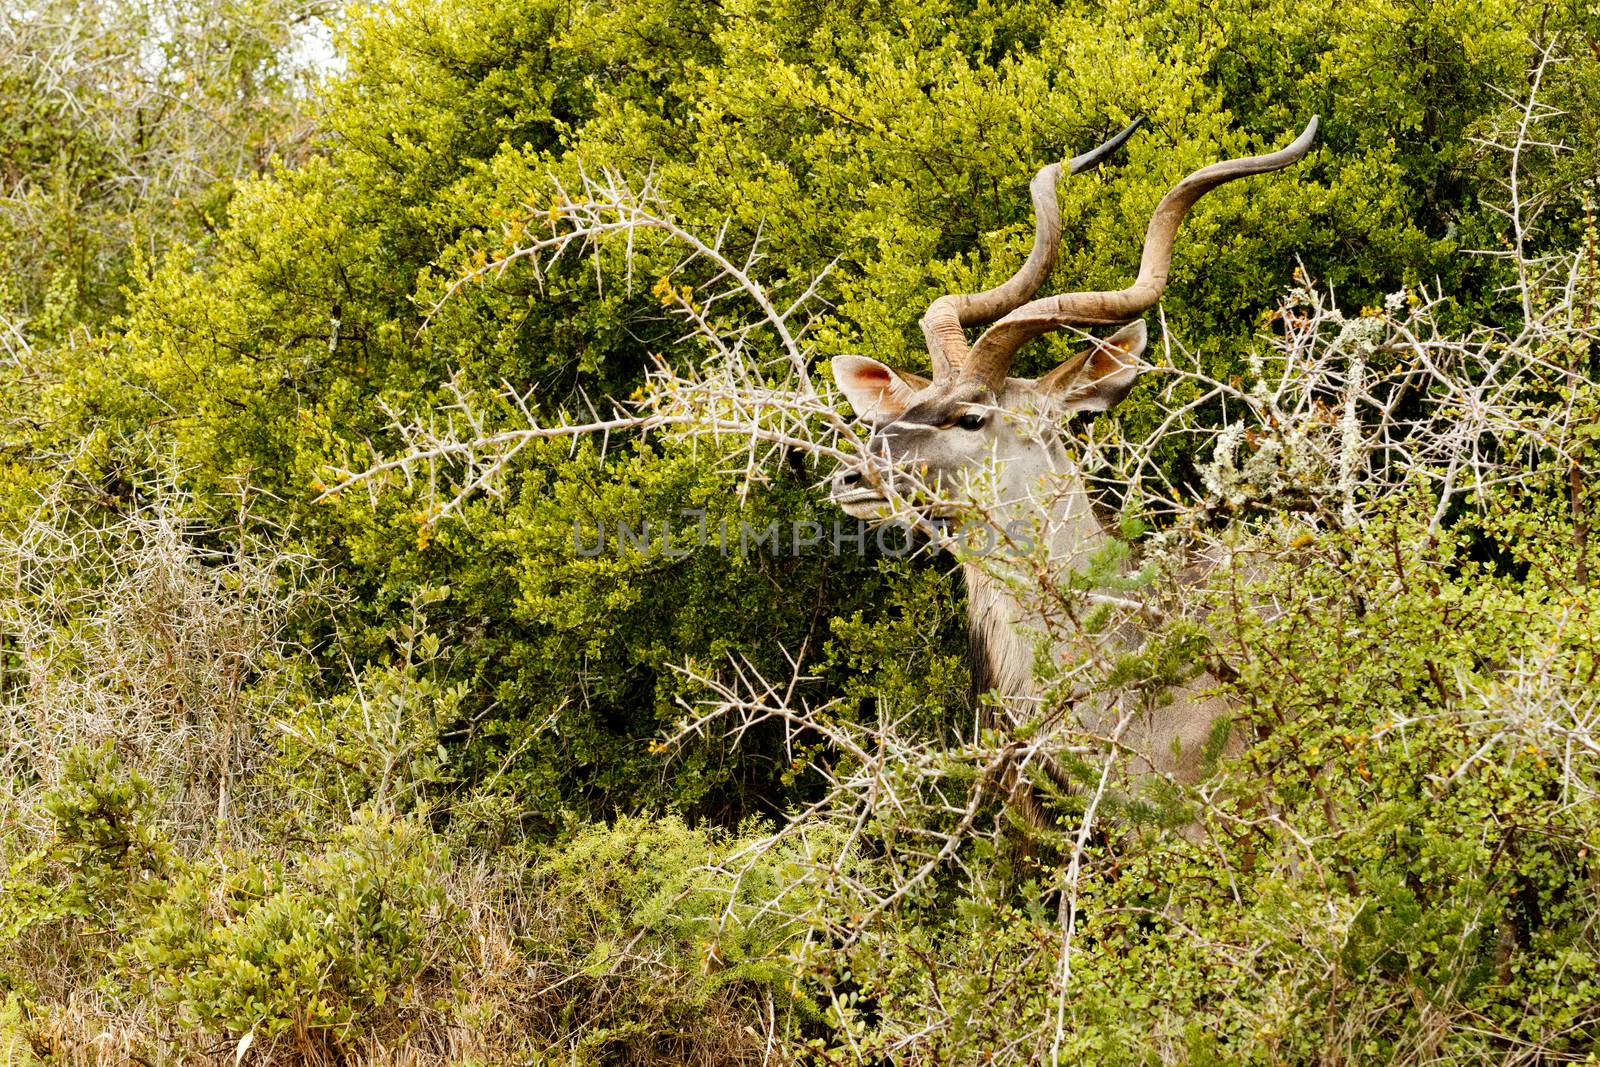 Greater Kudu standing and hiding behind the thorny bushes.